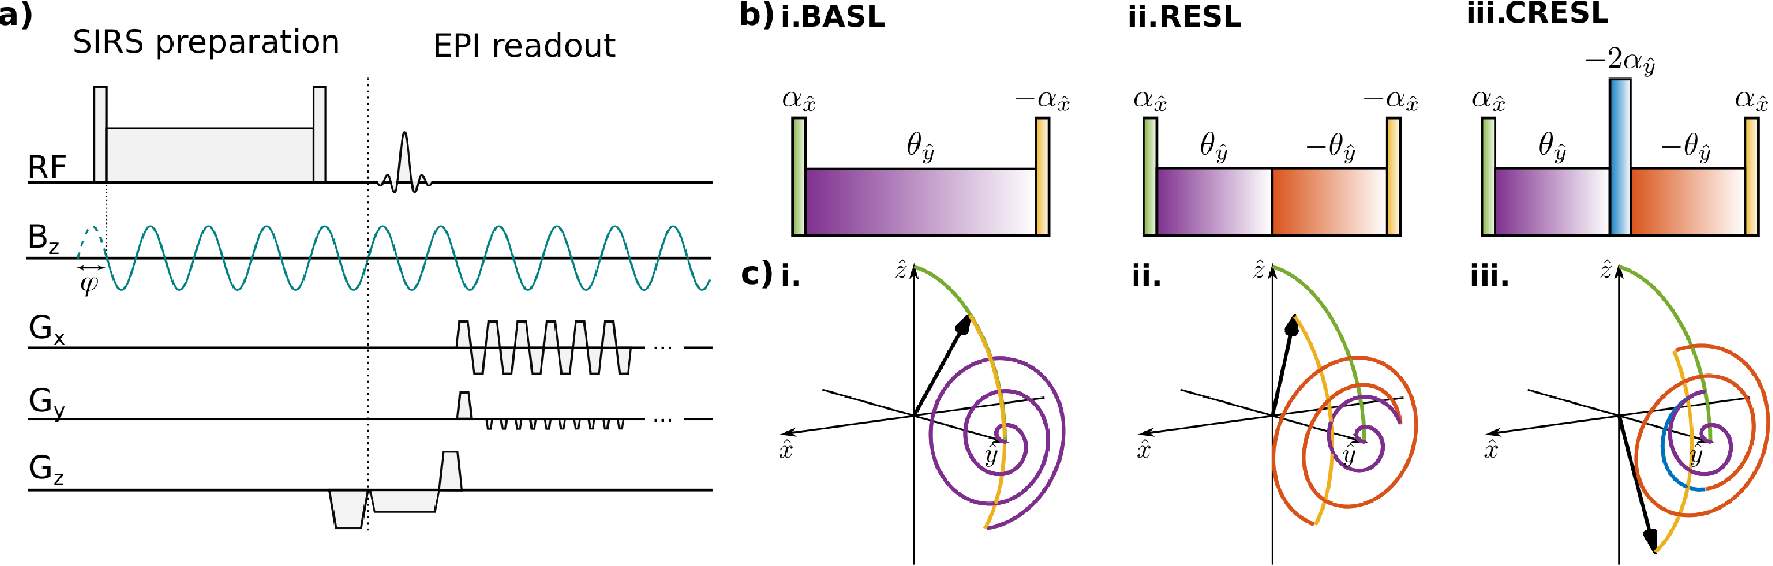 Analysis of the robustness and dynamics of spin-locking preparations for  the detection of oscillatory magnetic fields | Scientific Reports